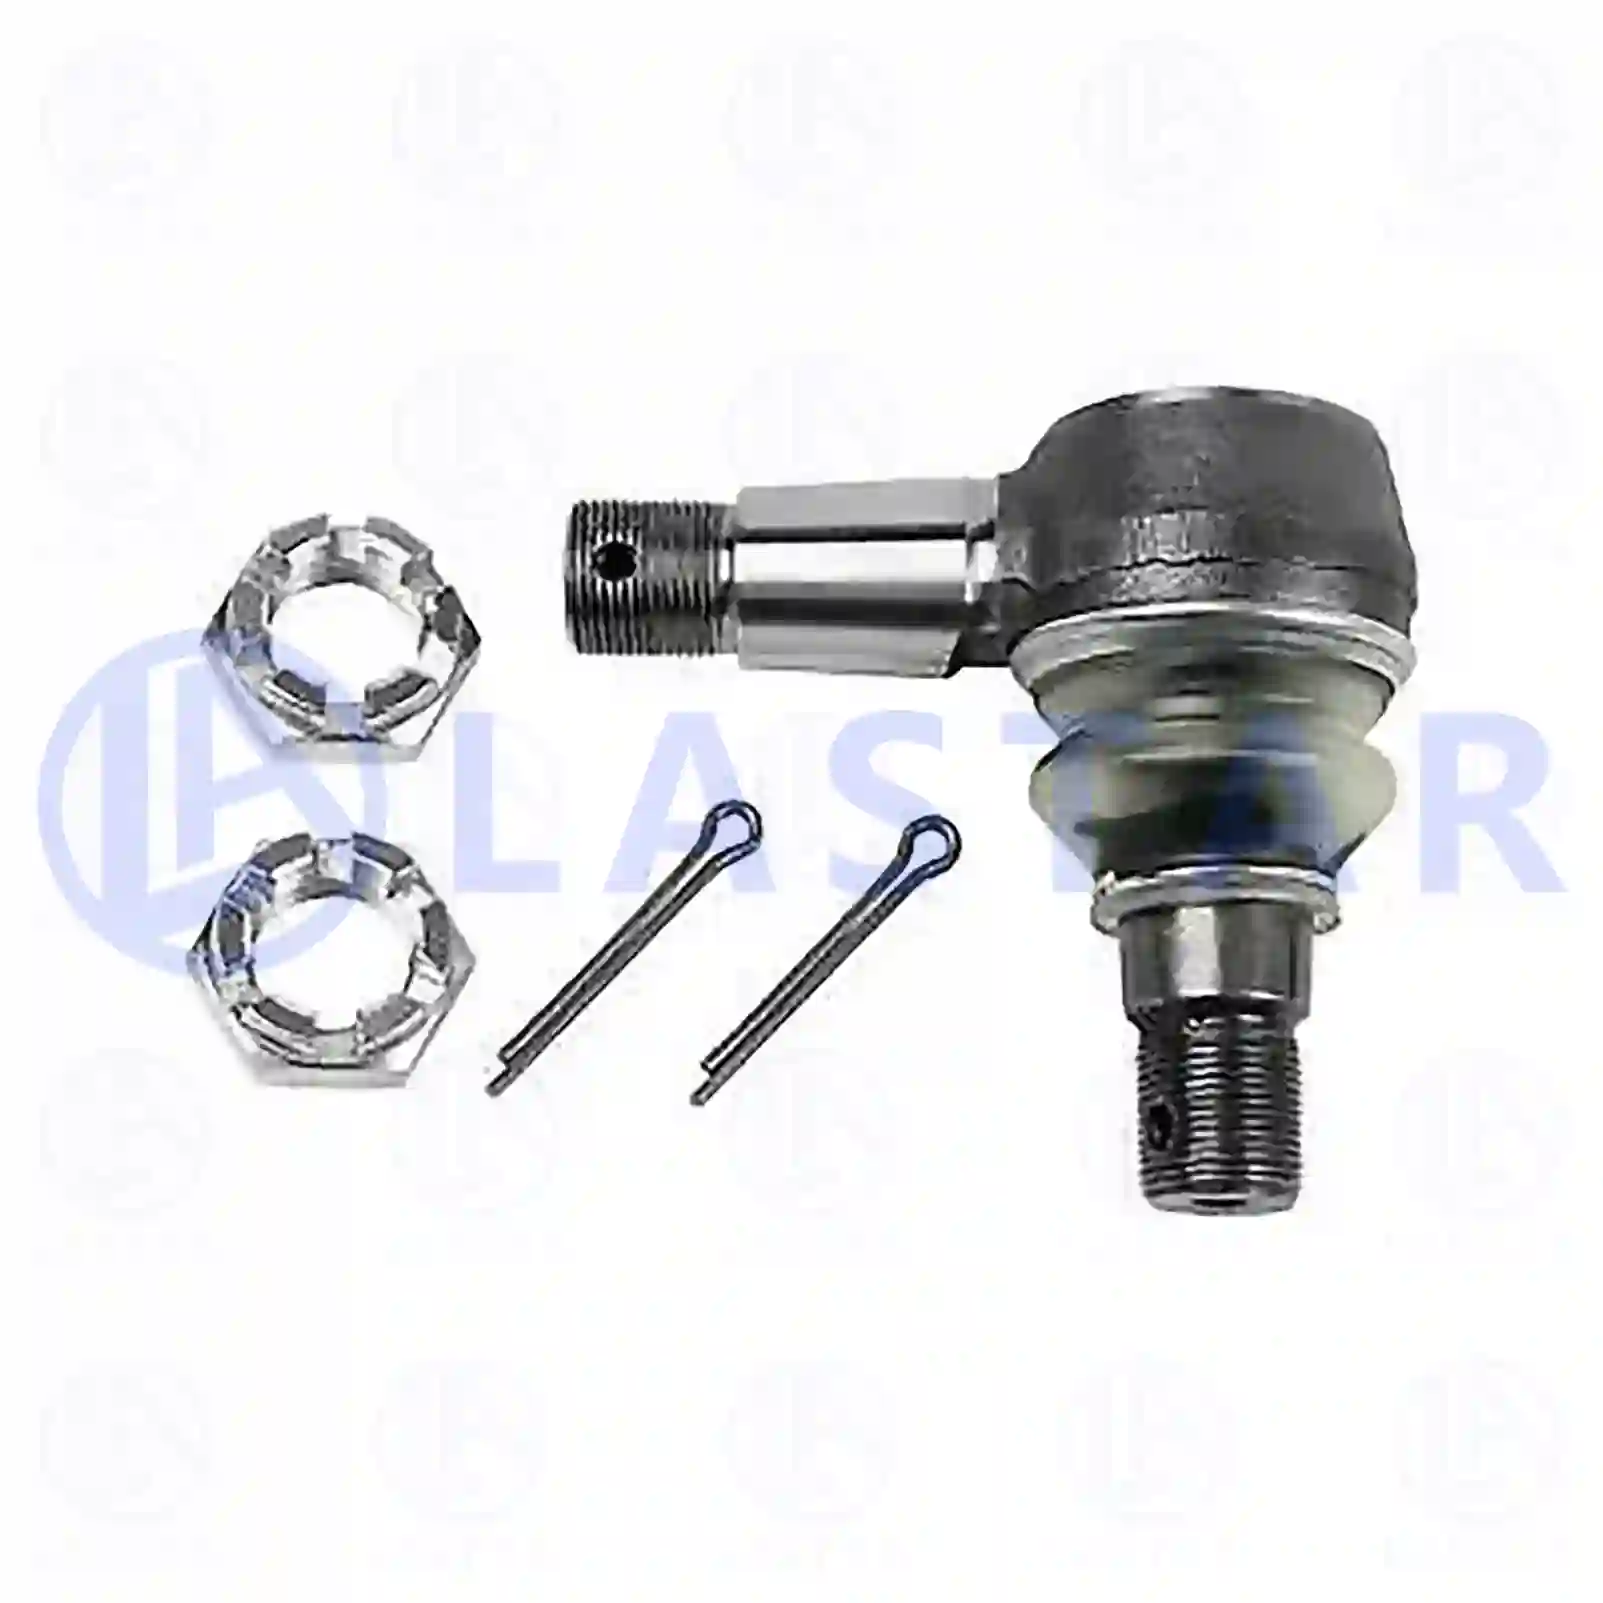 Ball joint, right hand thread, 77730628, 02460515, 2460515, 42196986, ZG40416-0008 ||  77730628 Lastar Spare Part | Truck Spare Parts, Auotomotive Spare Parts Ball joint, right hand thread, 77730628, 02460515, 2460515, 42196986, ZG40416-0008 ||  77730628 Lastar Spare Part | Truck Spare Parts, Auotomotive Spare Parts